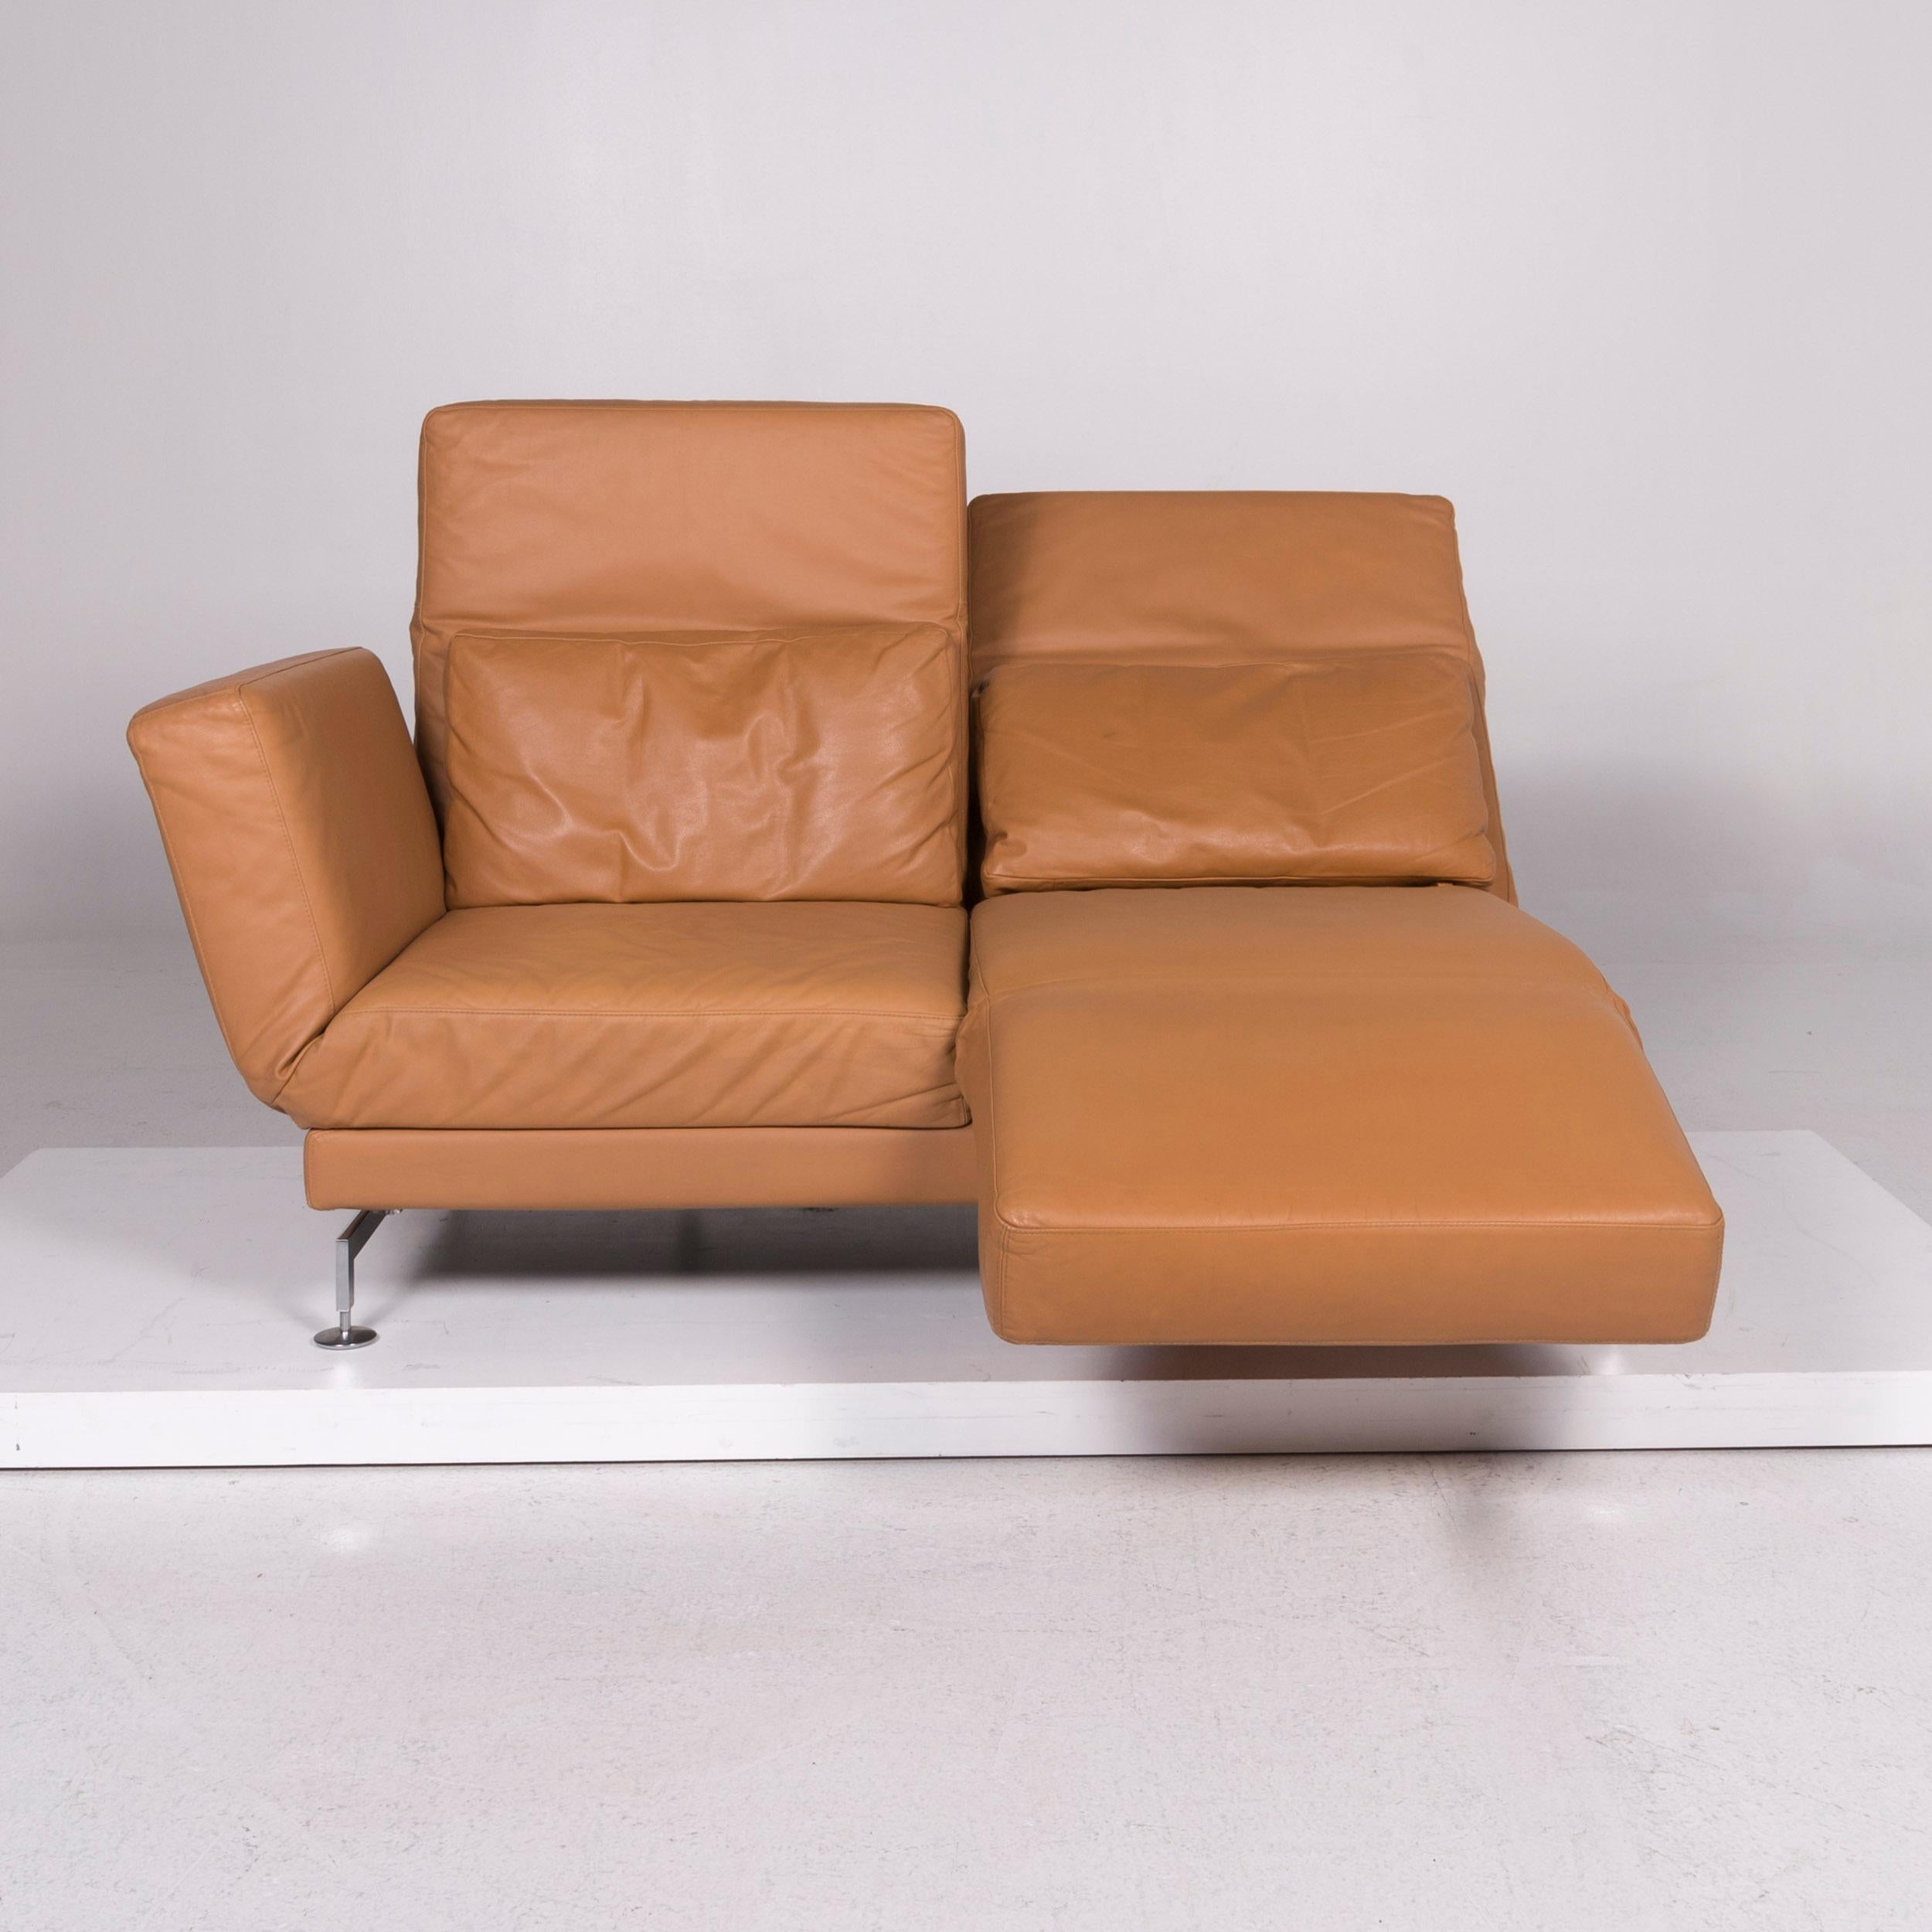 Brühl & Sippold Moule Leather Sofa Brown Two-Seat Incl. Function For Sale 2